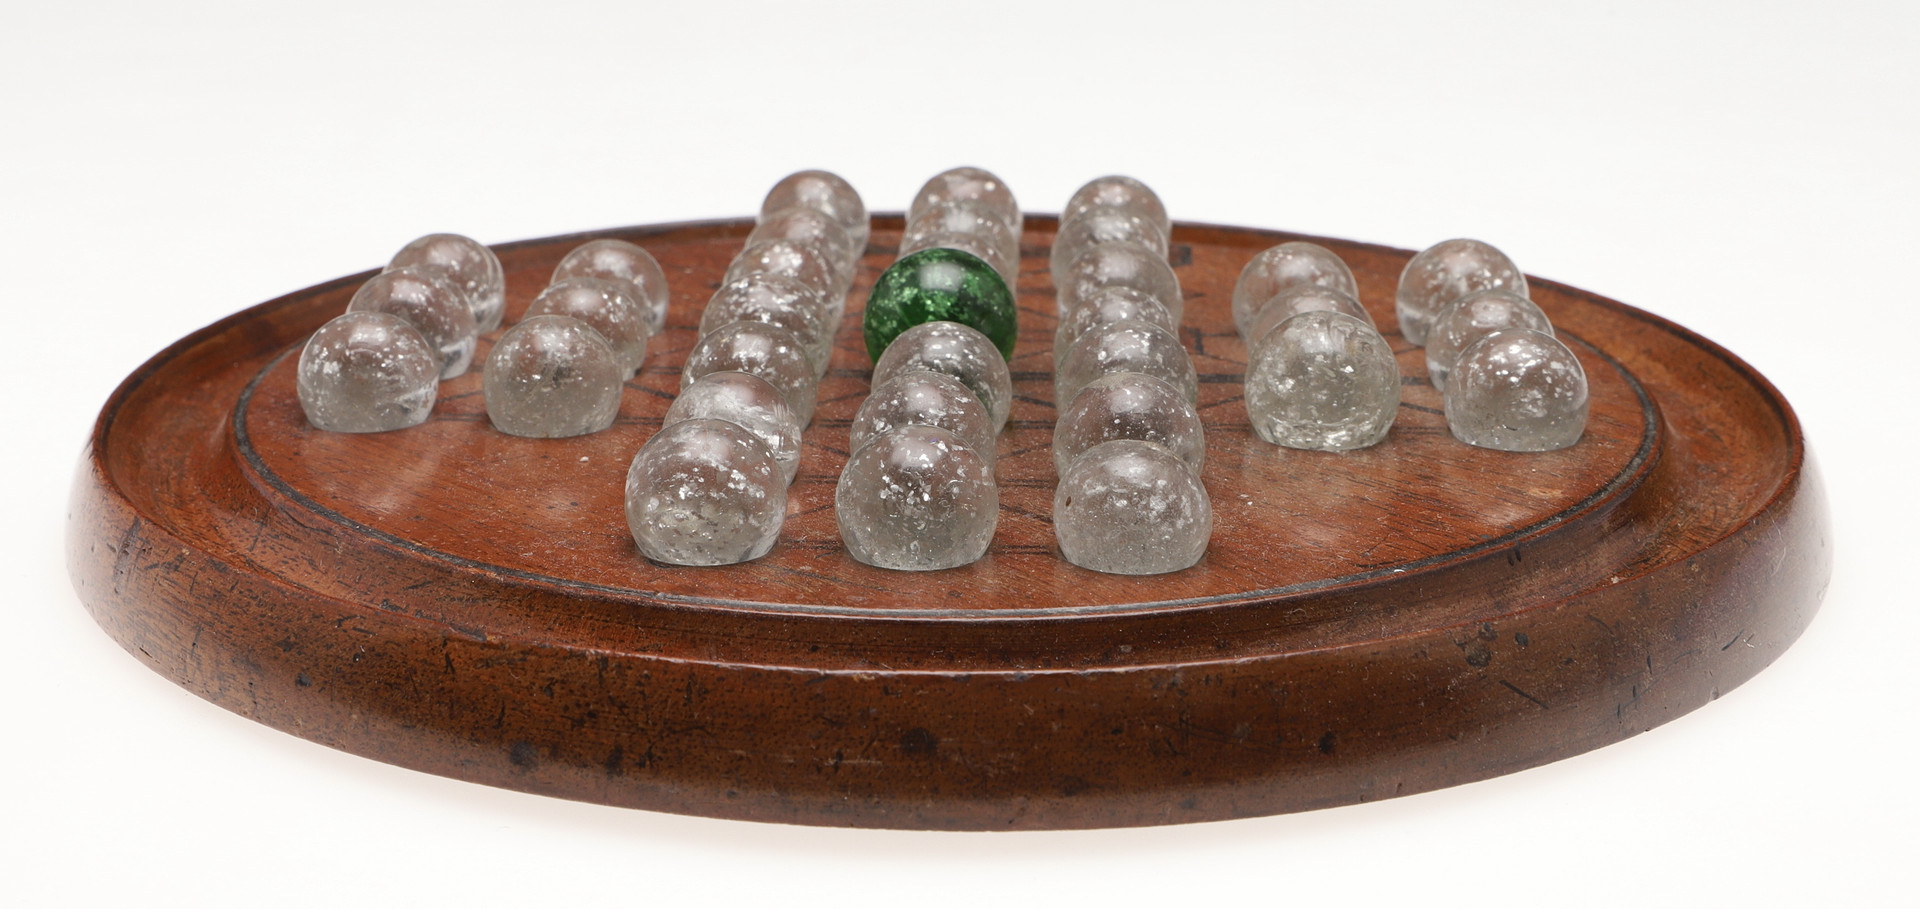 A LATE 19TH CENTURY MAHOGANY SOLITAIRE GAME. - Image 3 of 5